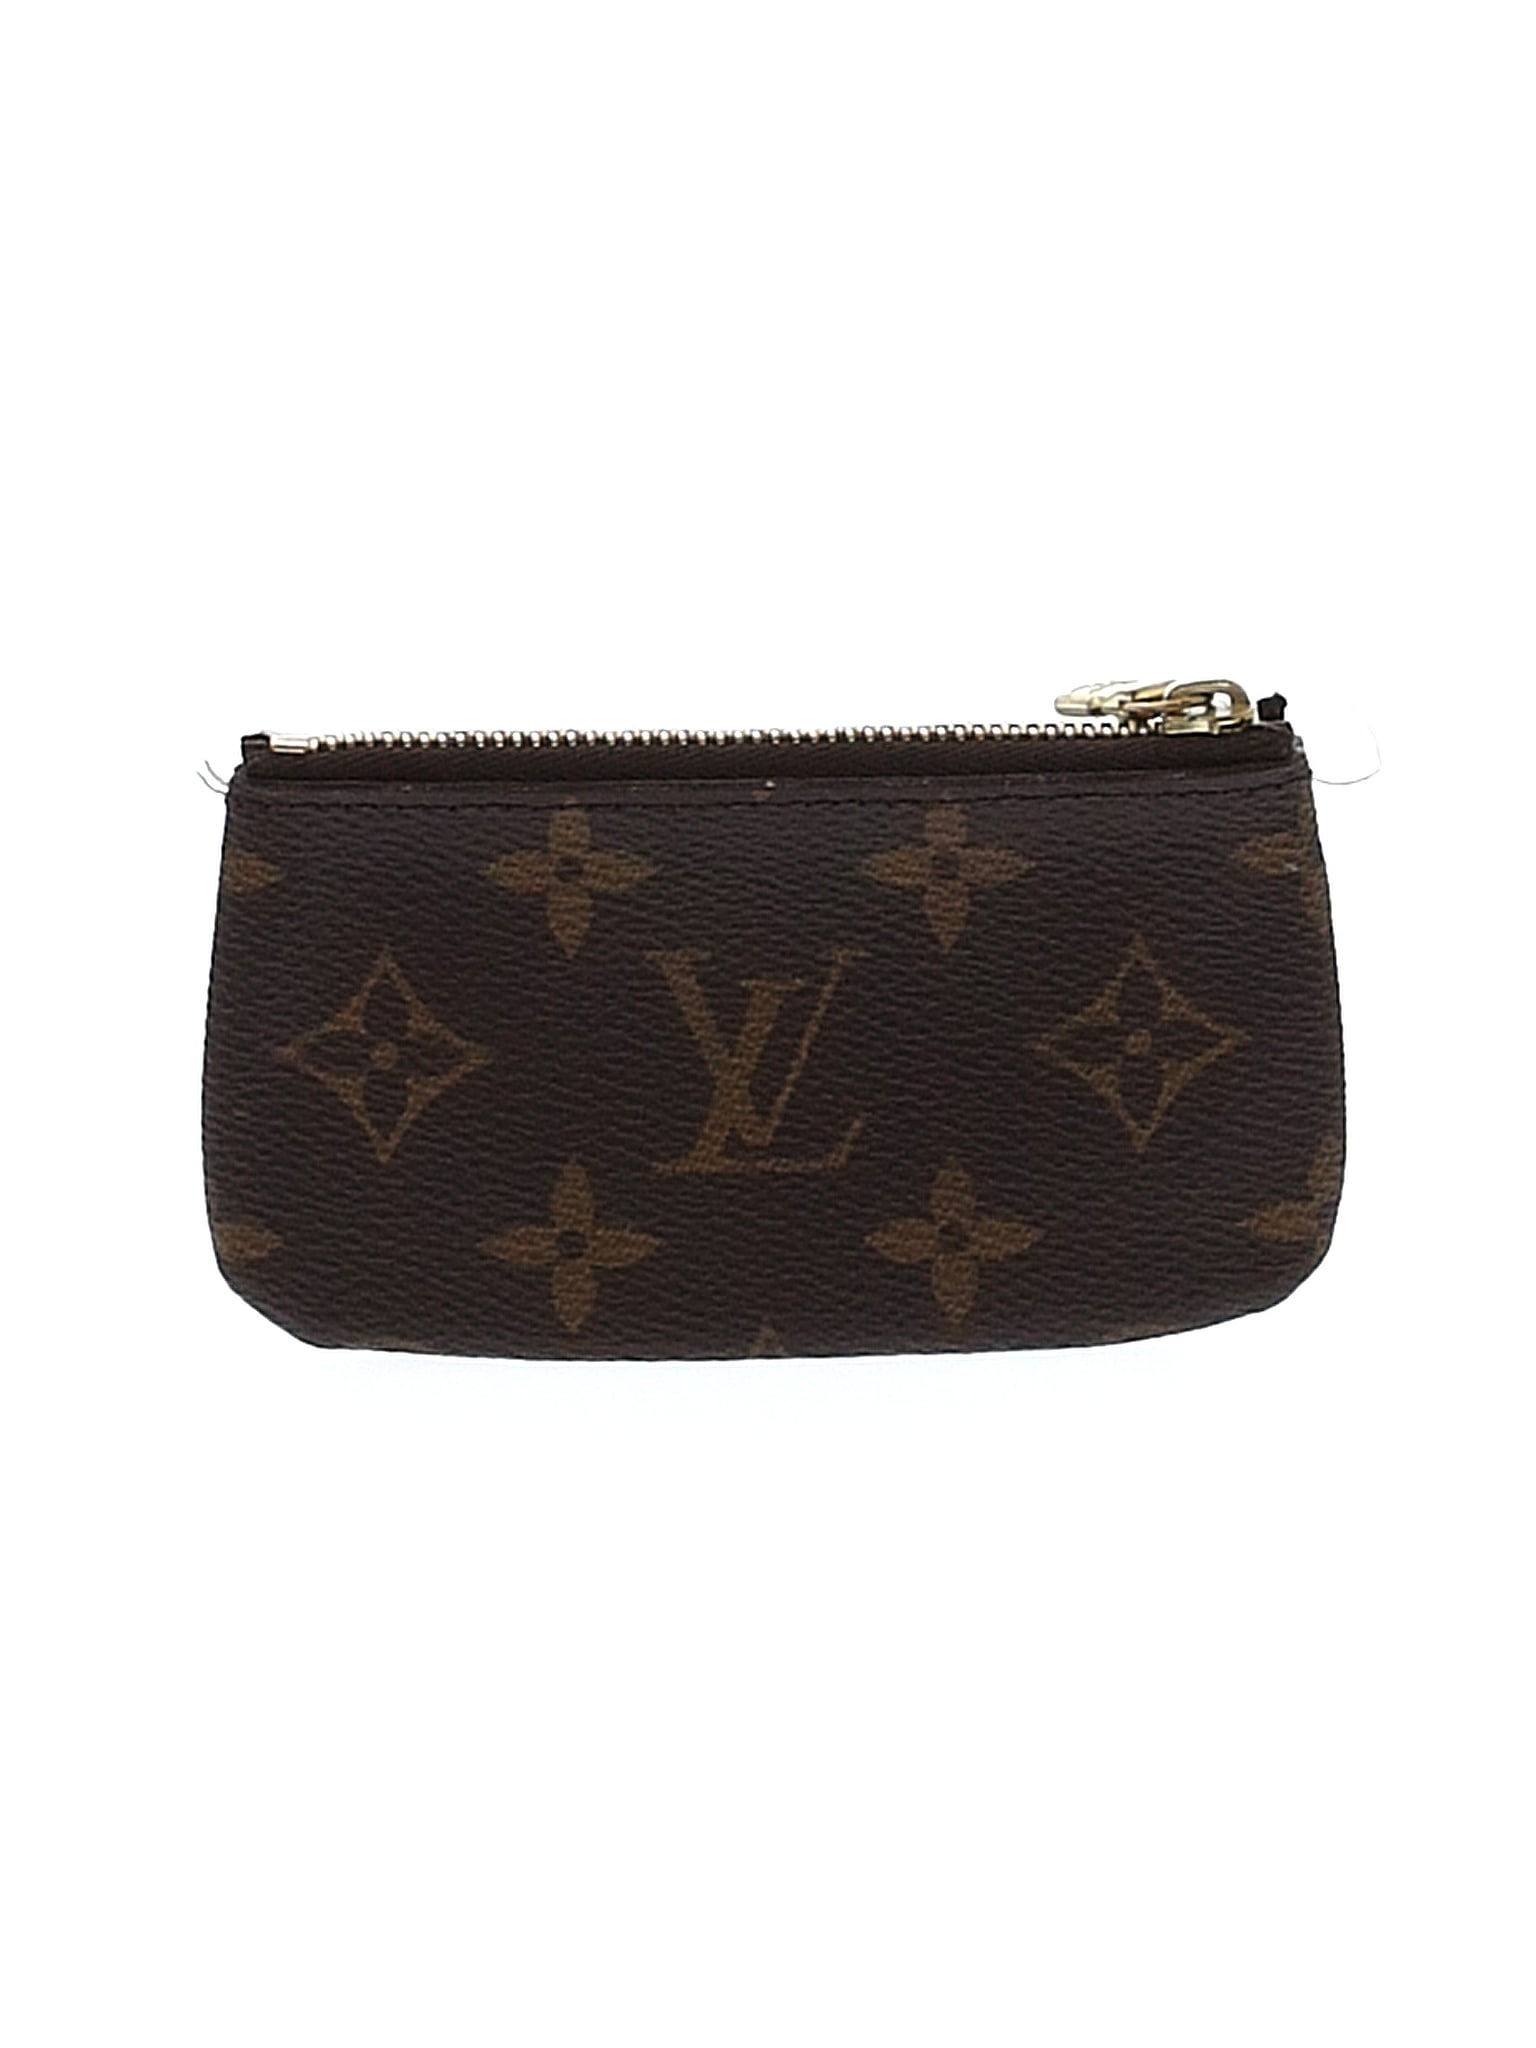 Louis Vuitton Wallets On Sale Up To 90% Off Retail